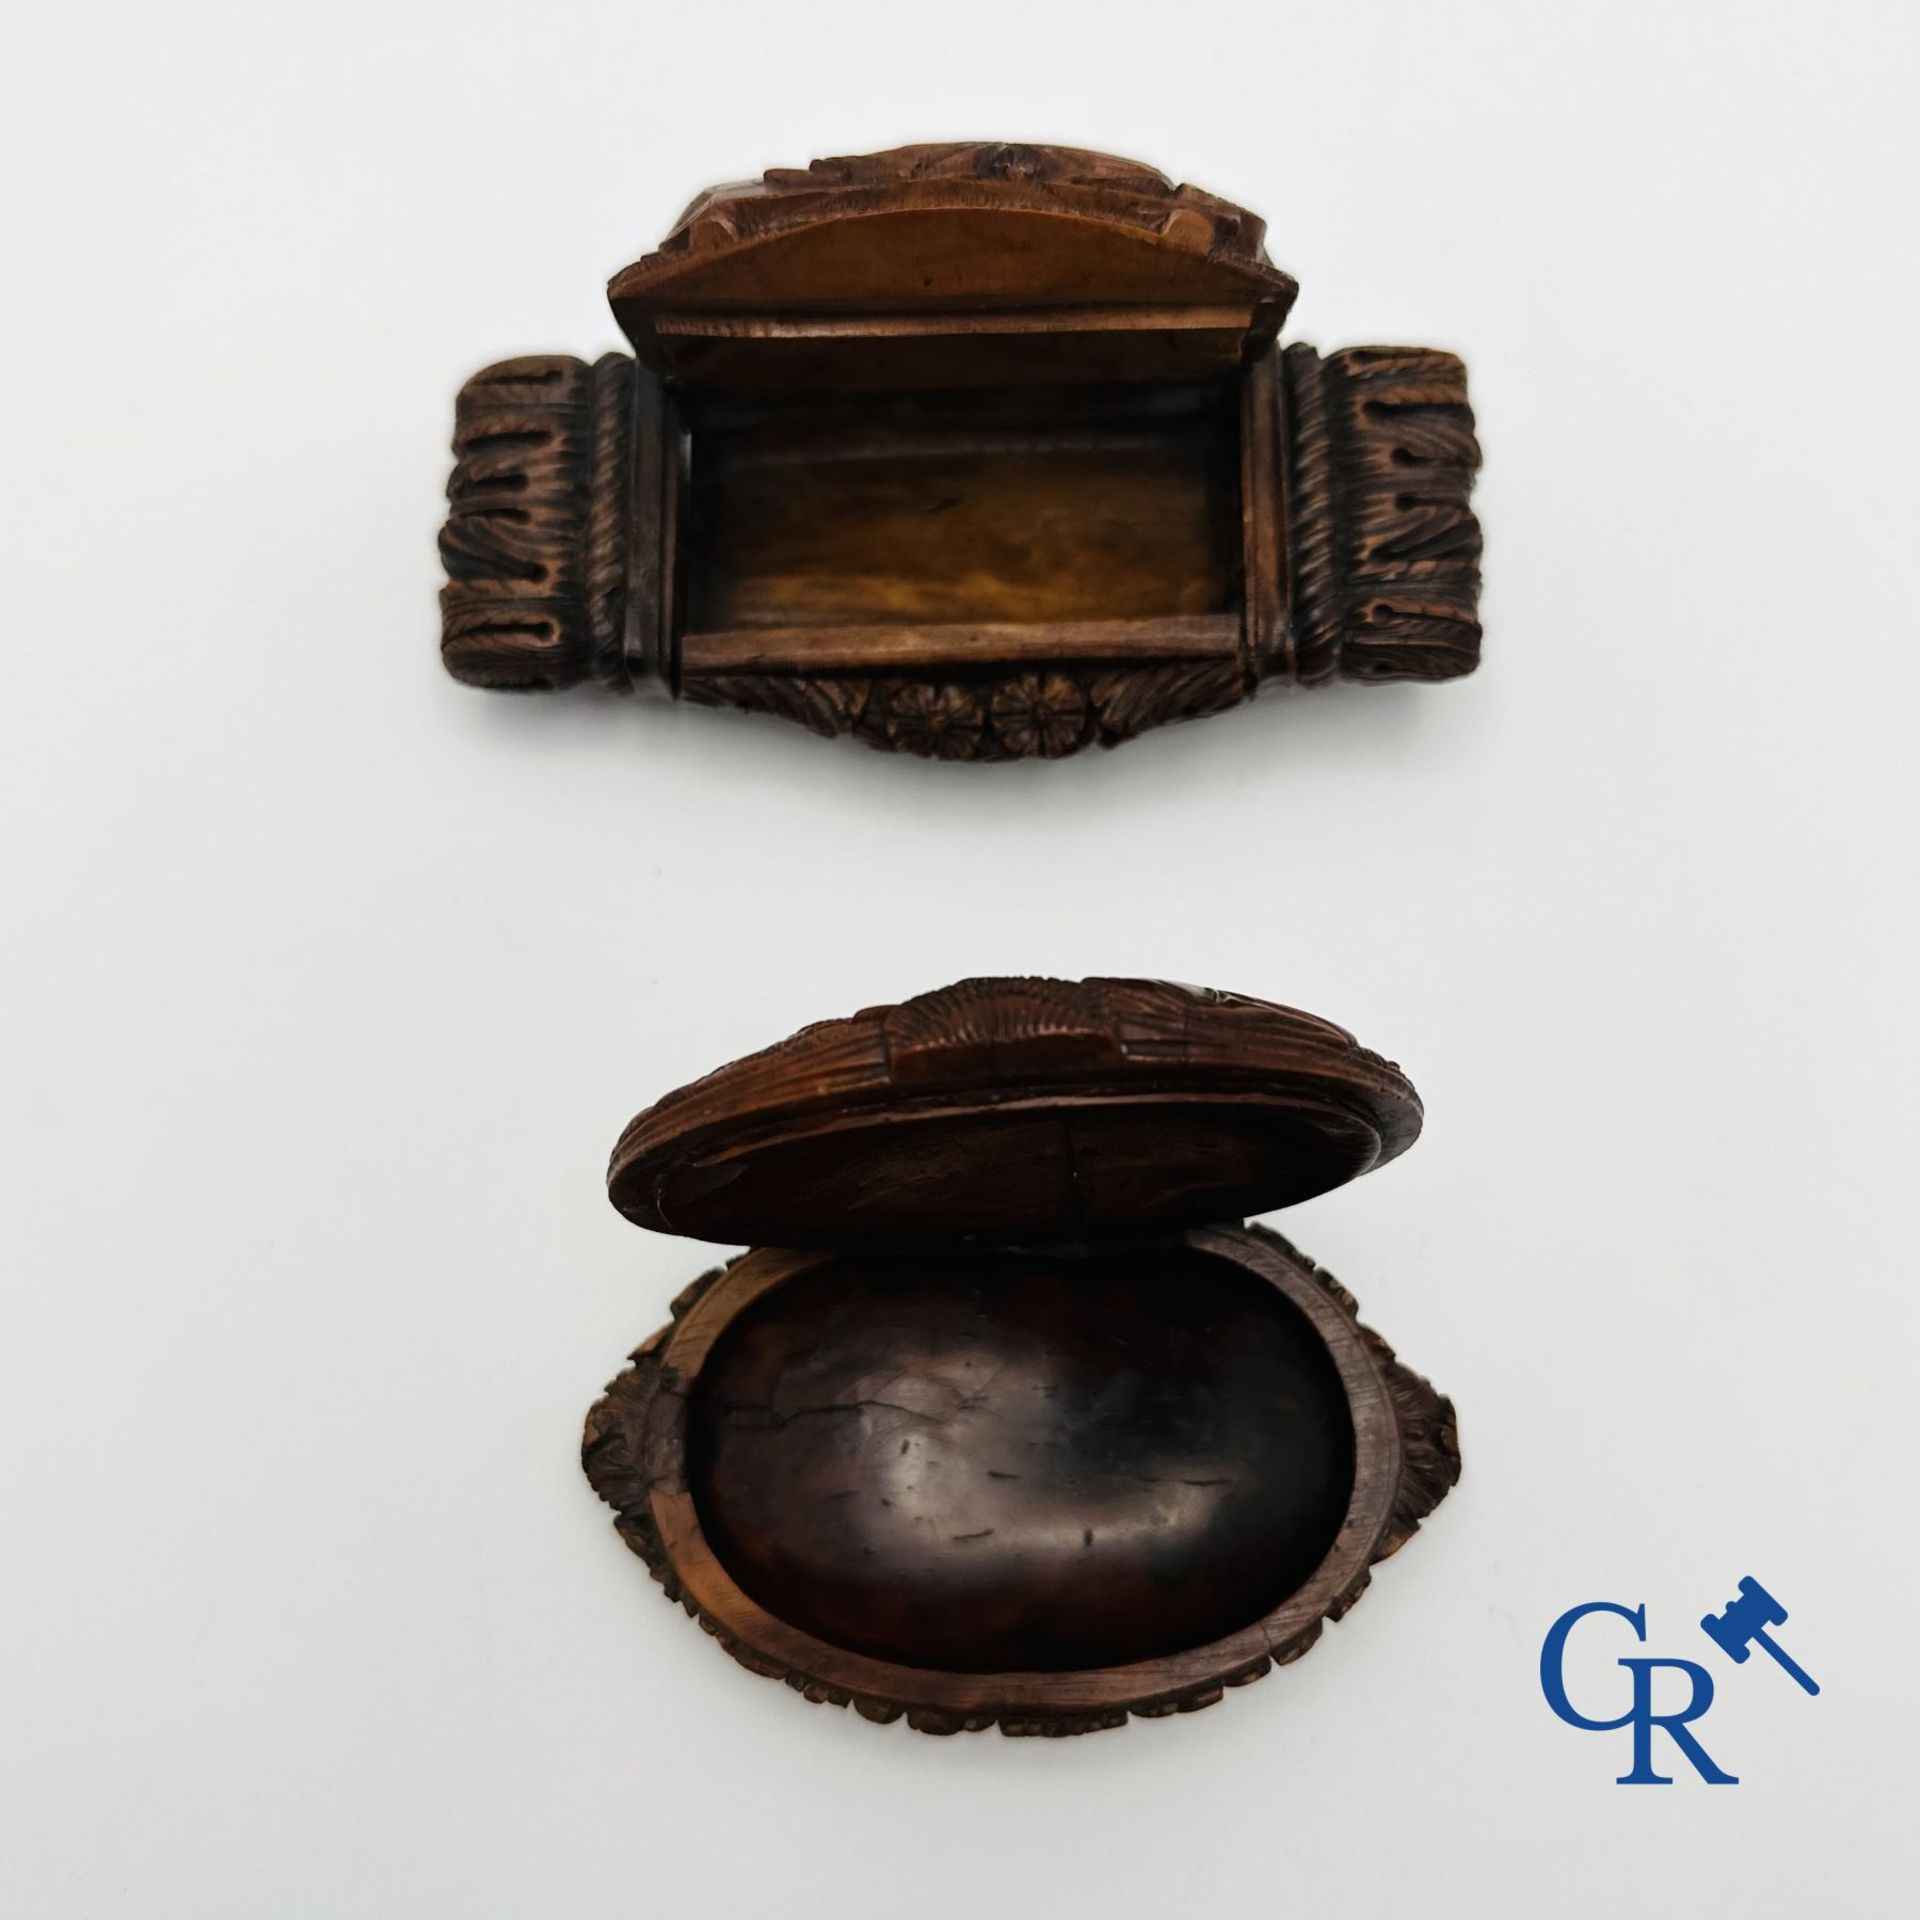 Display case objects: 2 pill boxes in sculpted corozo walnut. - Image 3 of 3